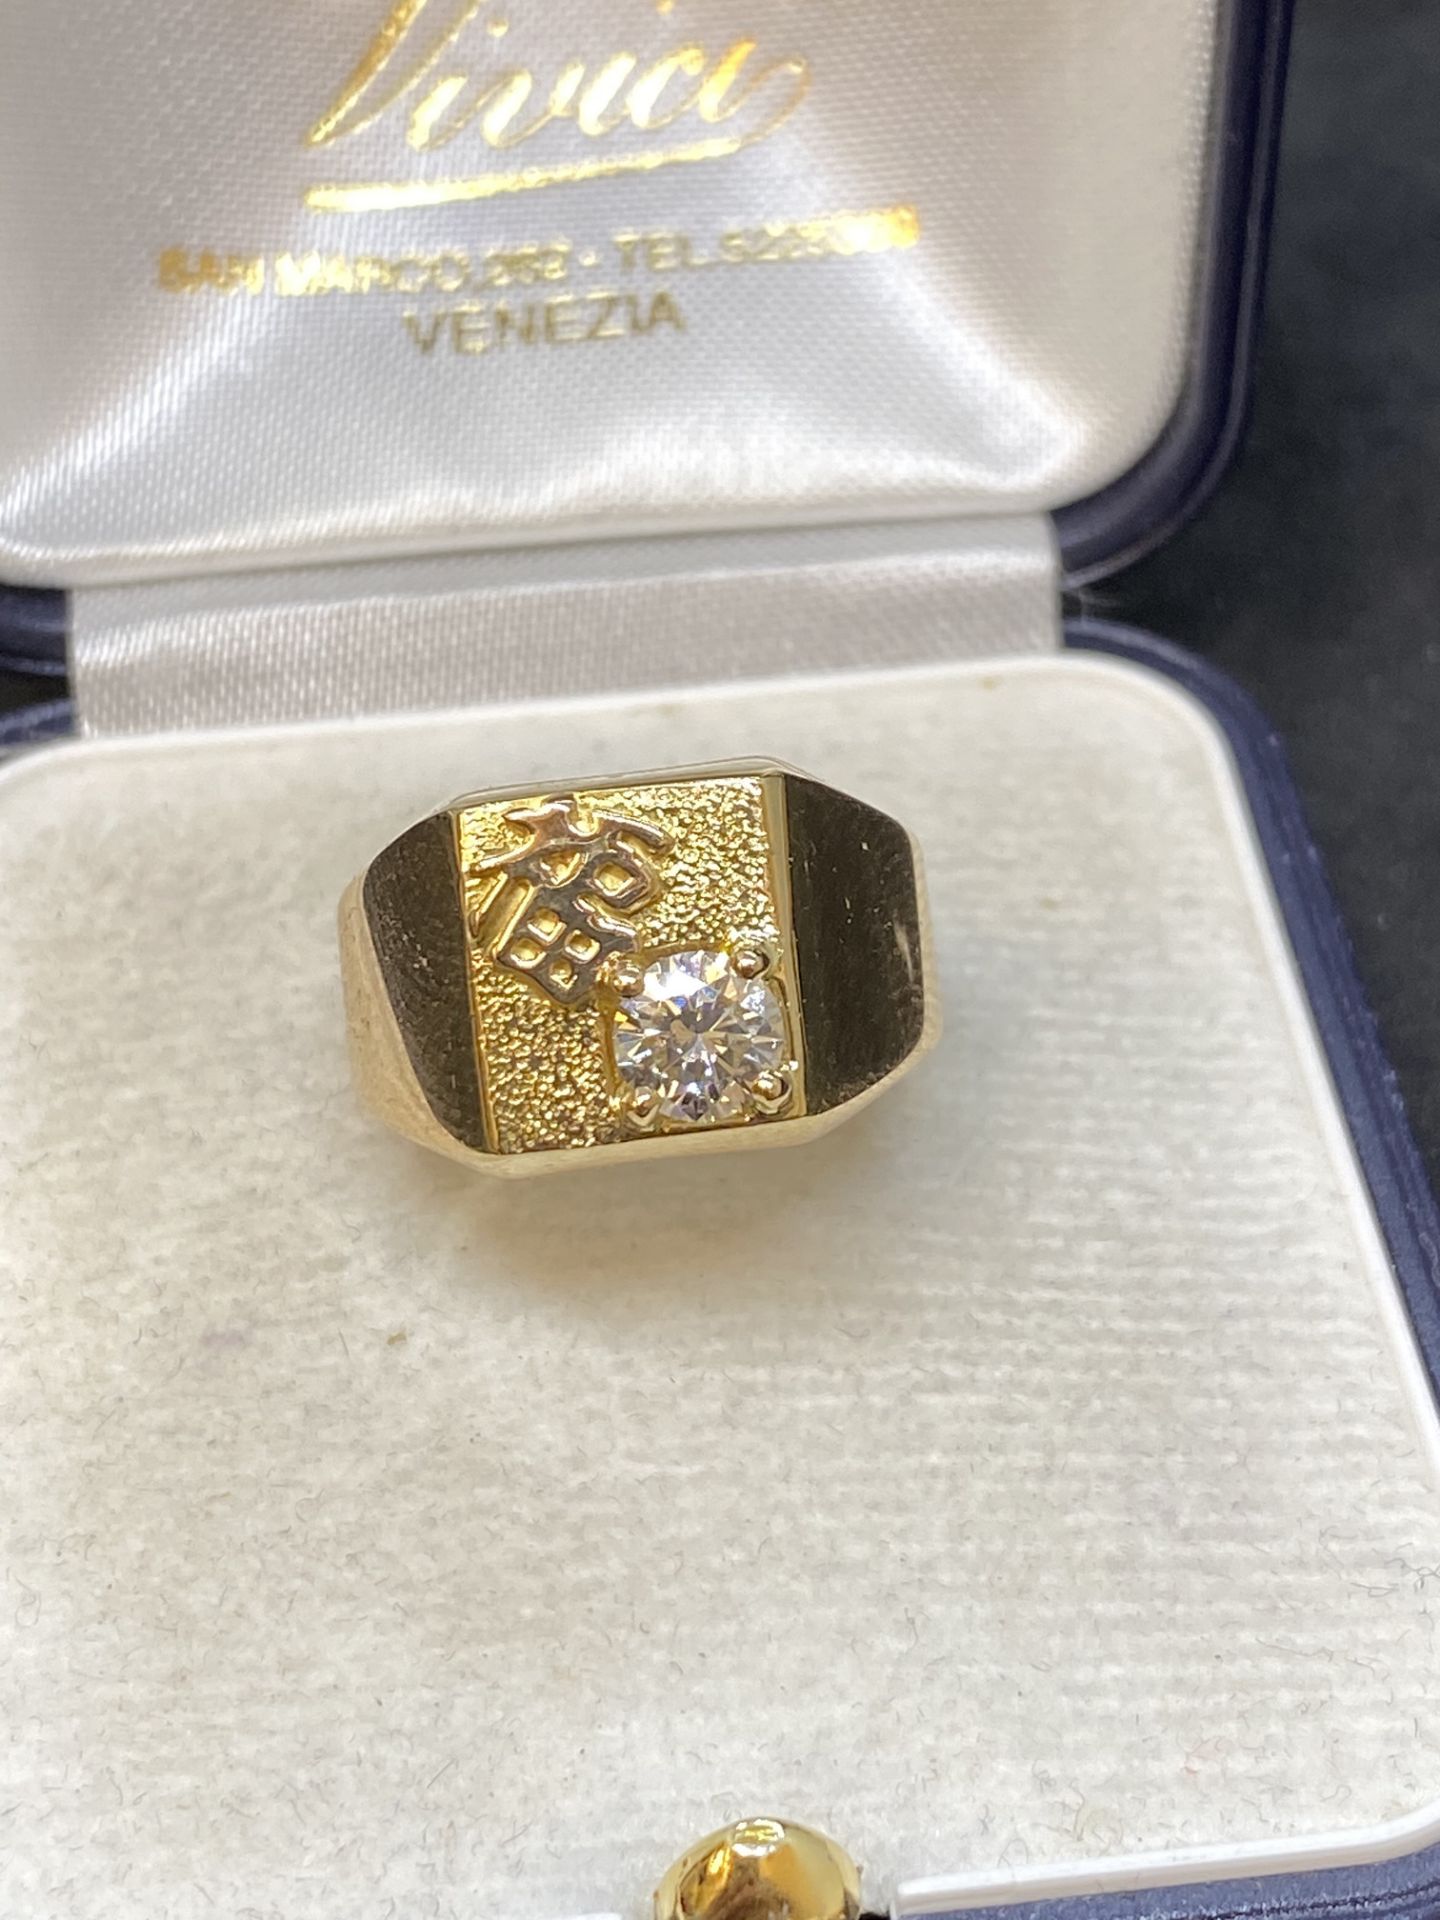 YELLOW METAL CHINESE WRITING WITH 0.60ct G/VS DIAMOND SET RING - TESTED AS 18ct GOLD - 9 GRAMS - Image 2 of 5